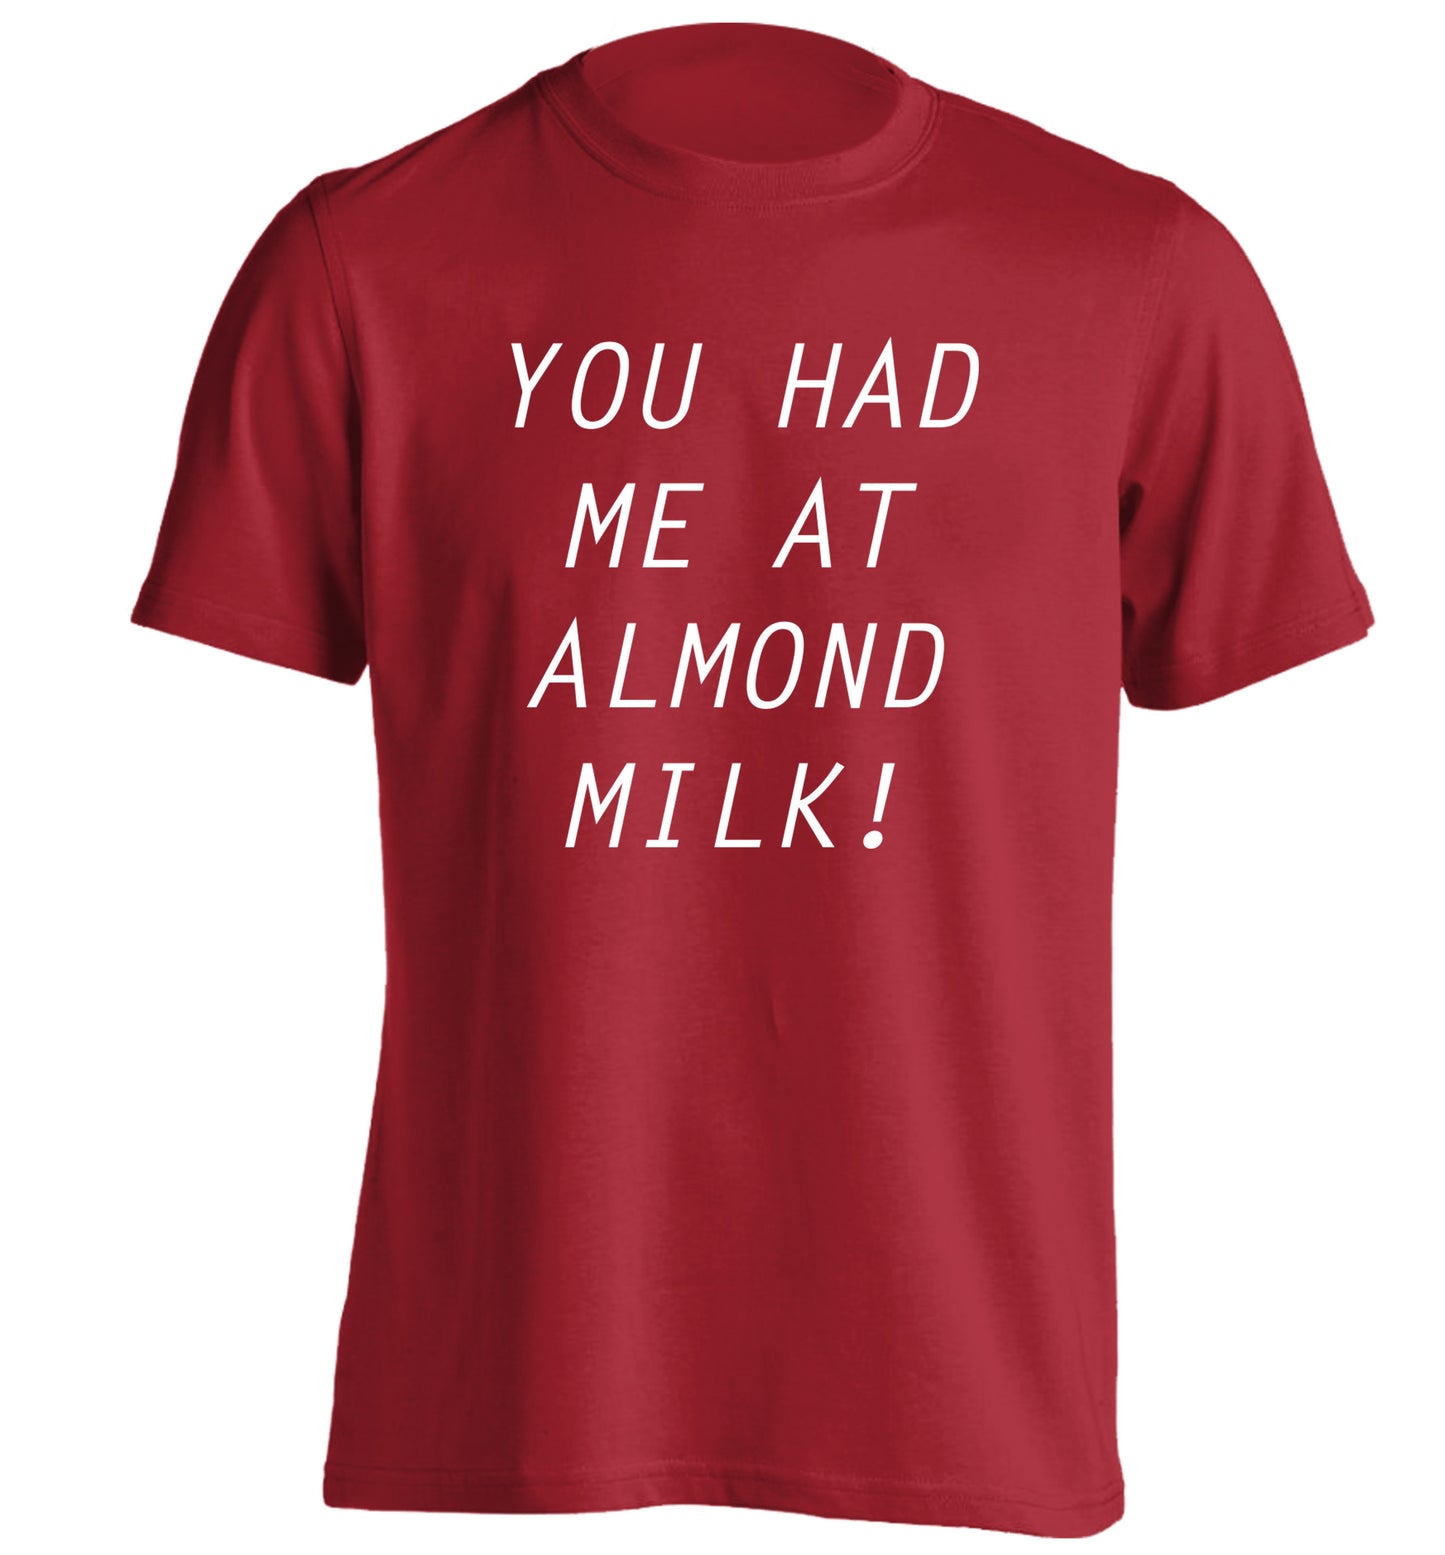 You had me at almond milk adults unisex red Tshirt 2XL